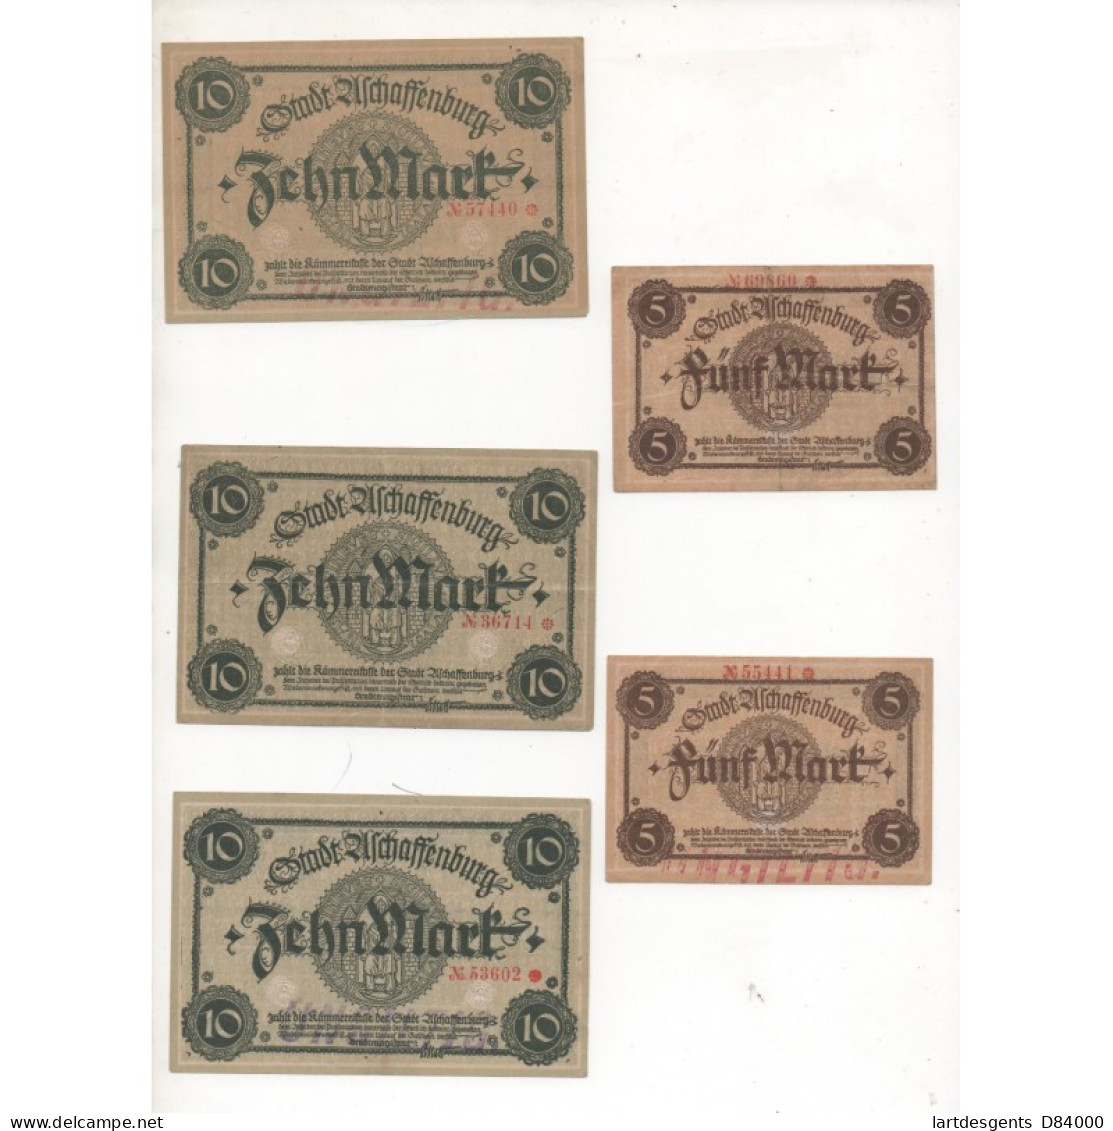 NOTGELD - ASCHAFFENBURG - 7 Different Notes 5 & 10 & 20 Mark - 2 Series - 1918 (A073) - [11] Local Banknote Issues